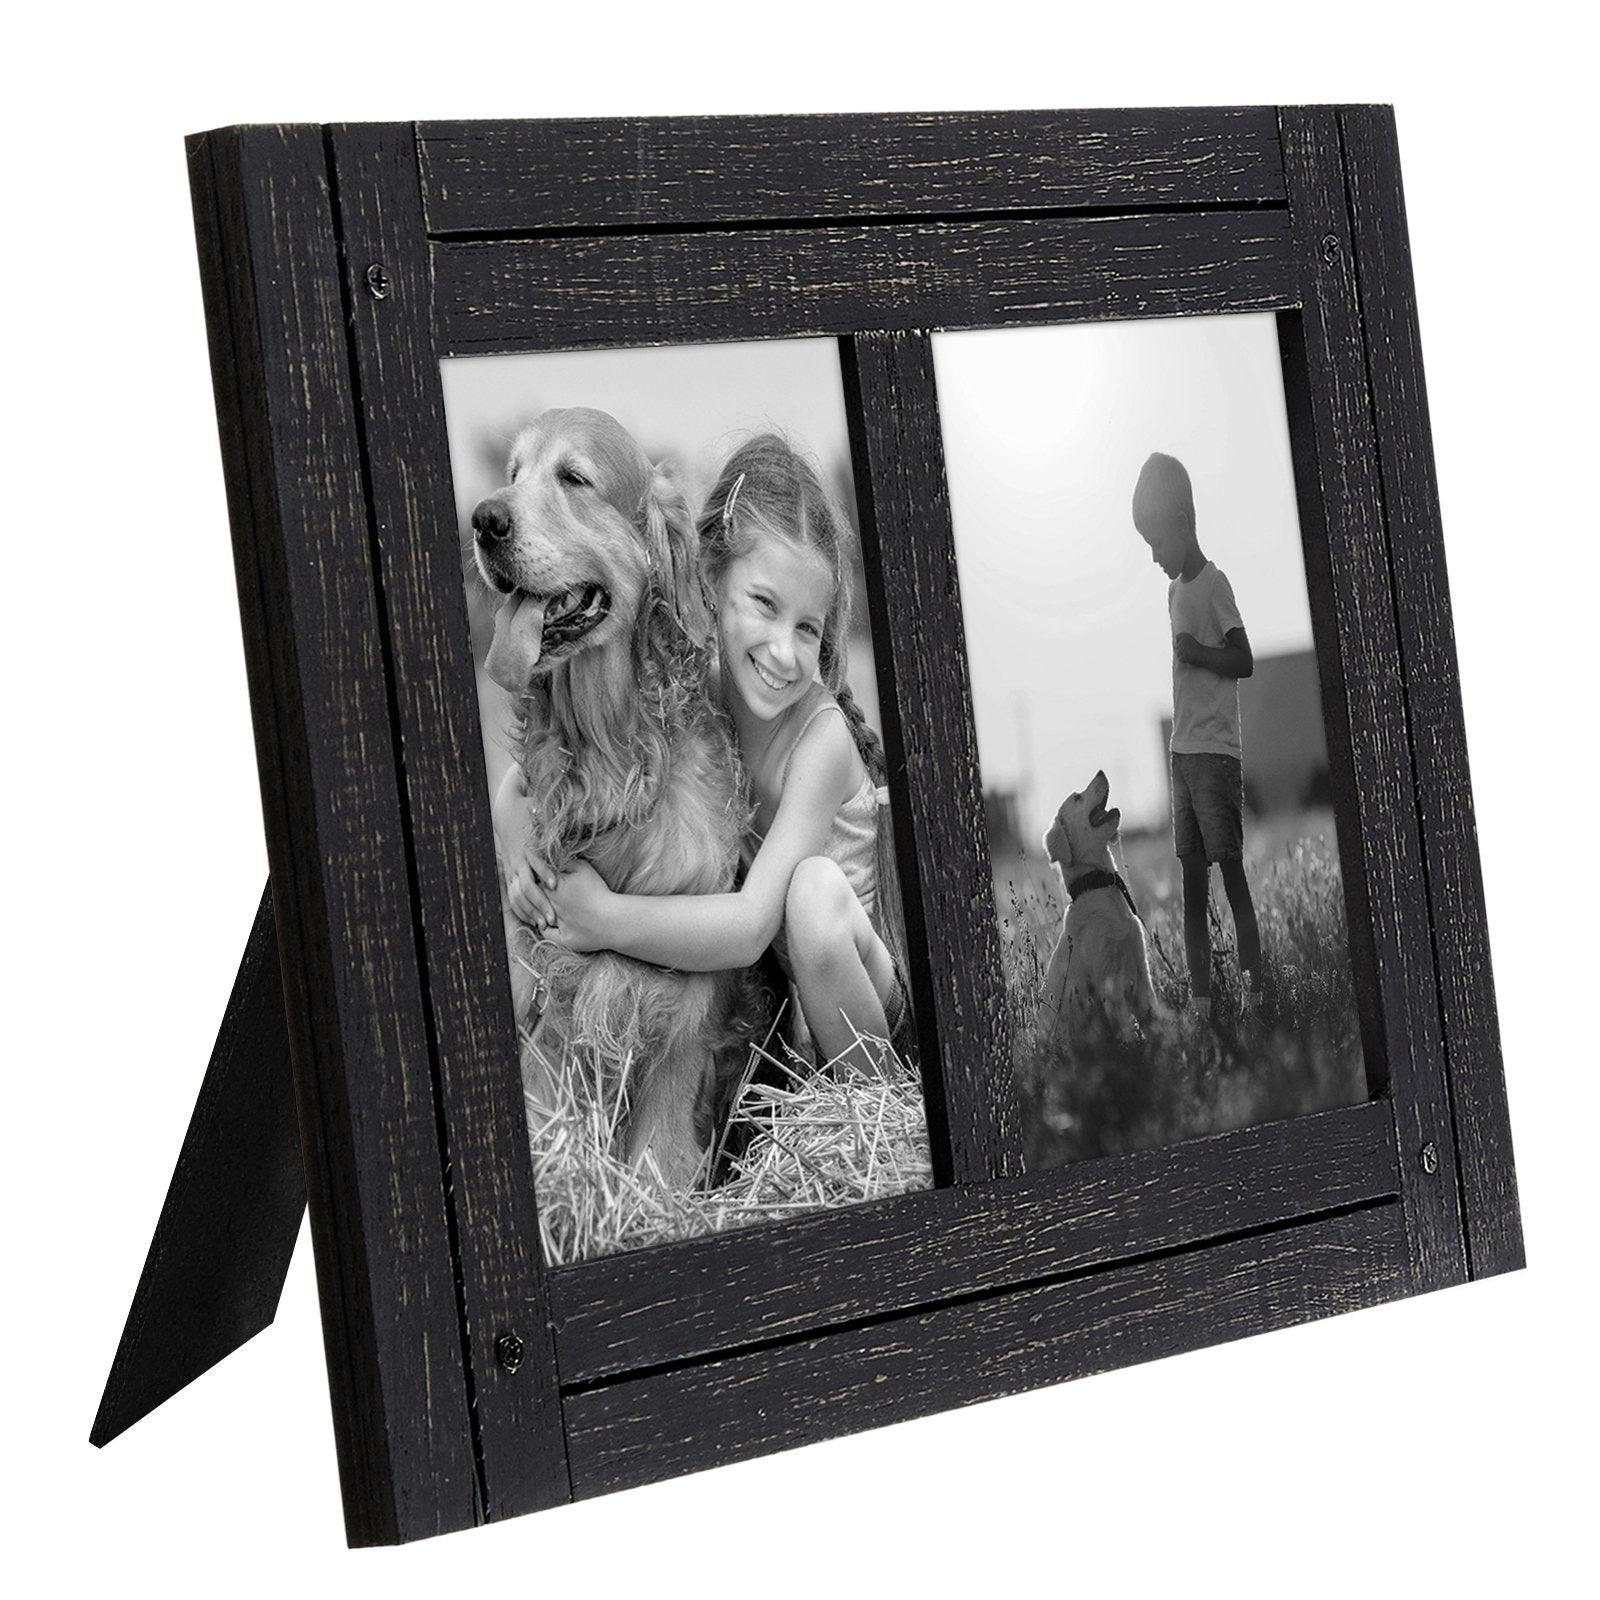 Americanflat Black Collage Picture Frame with 4 Openings - Made